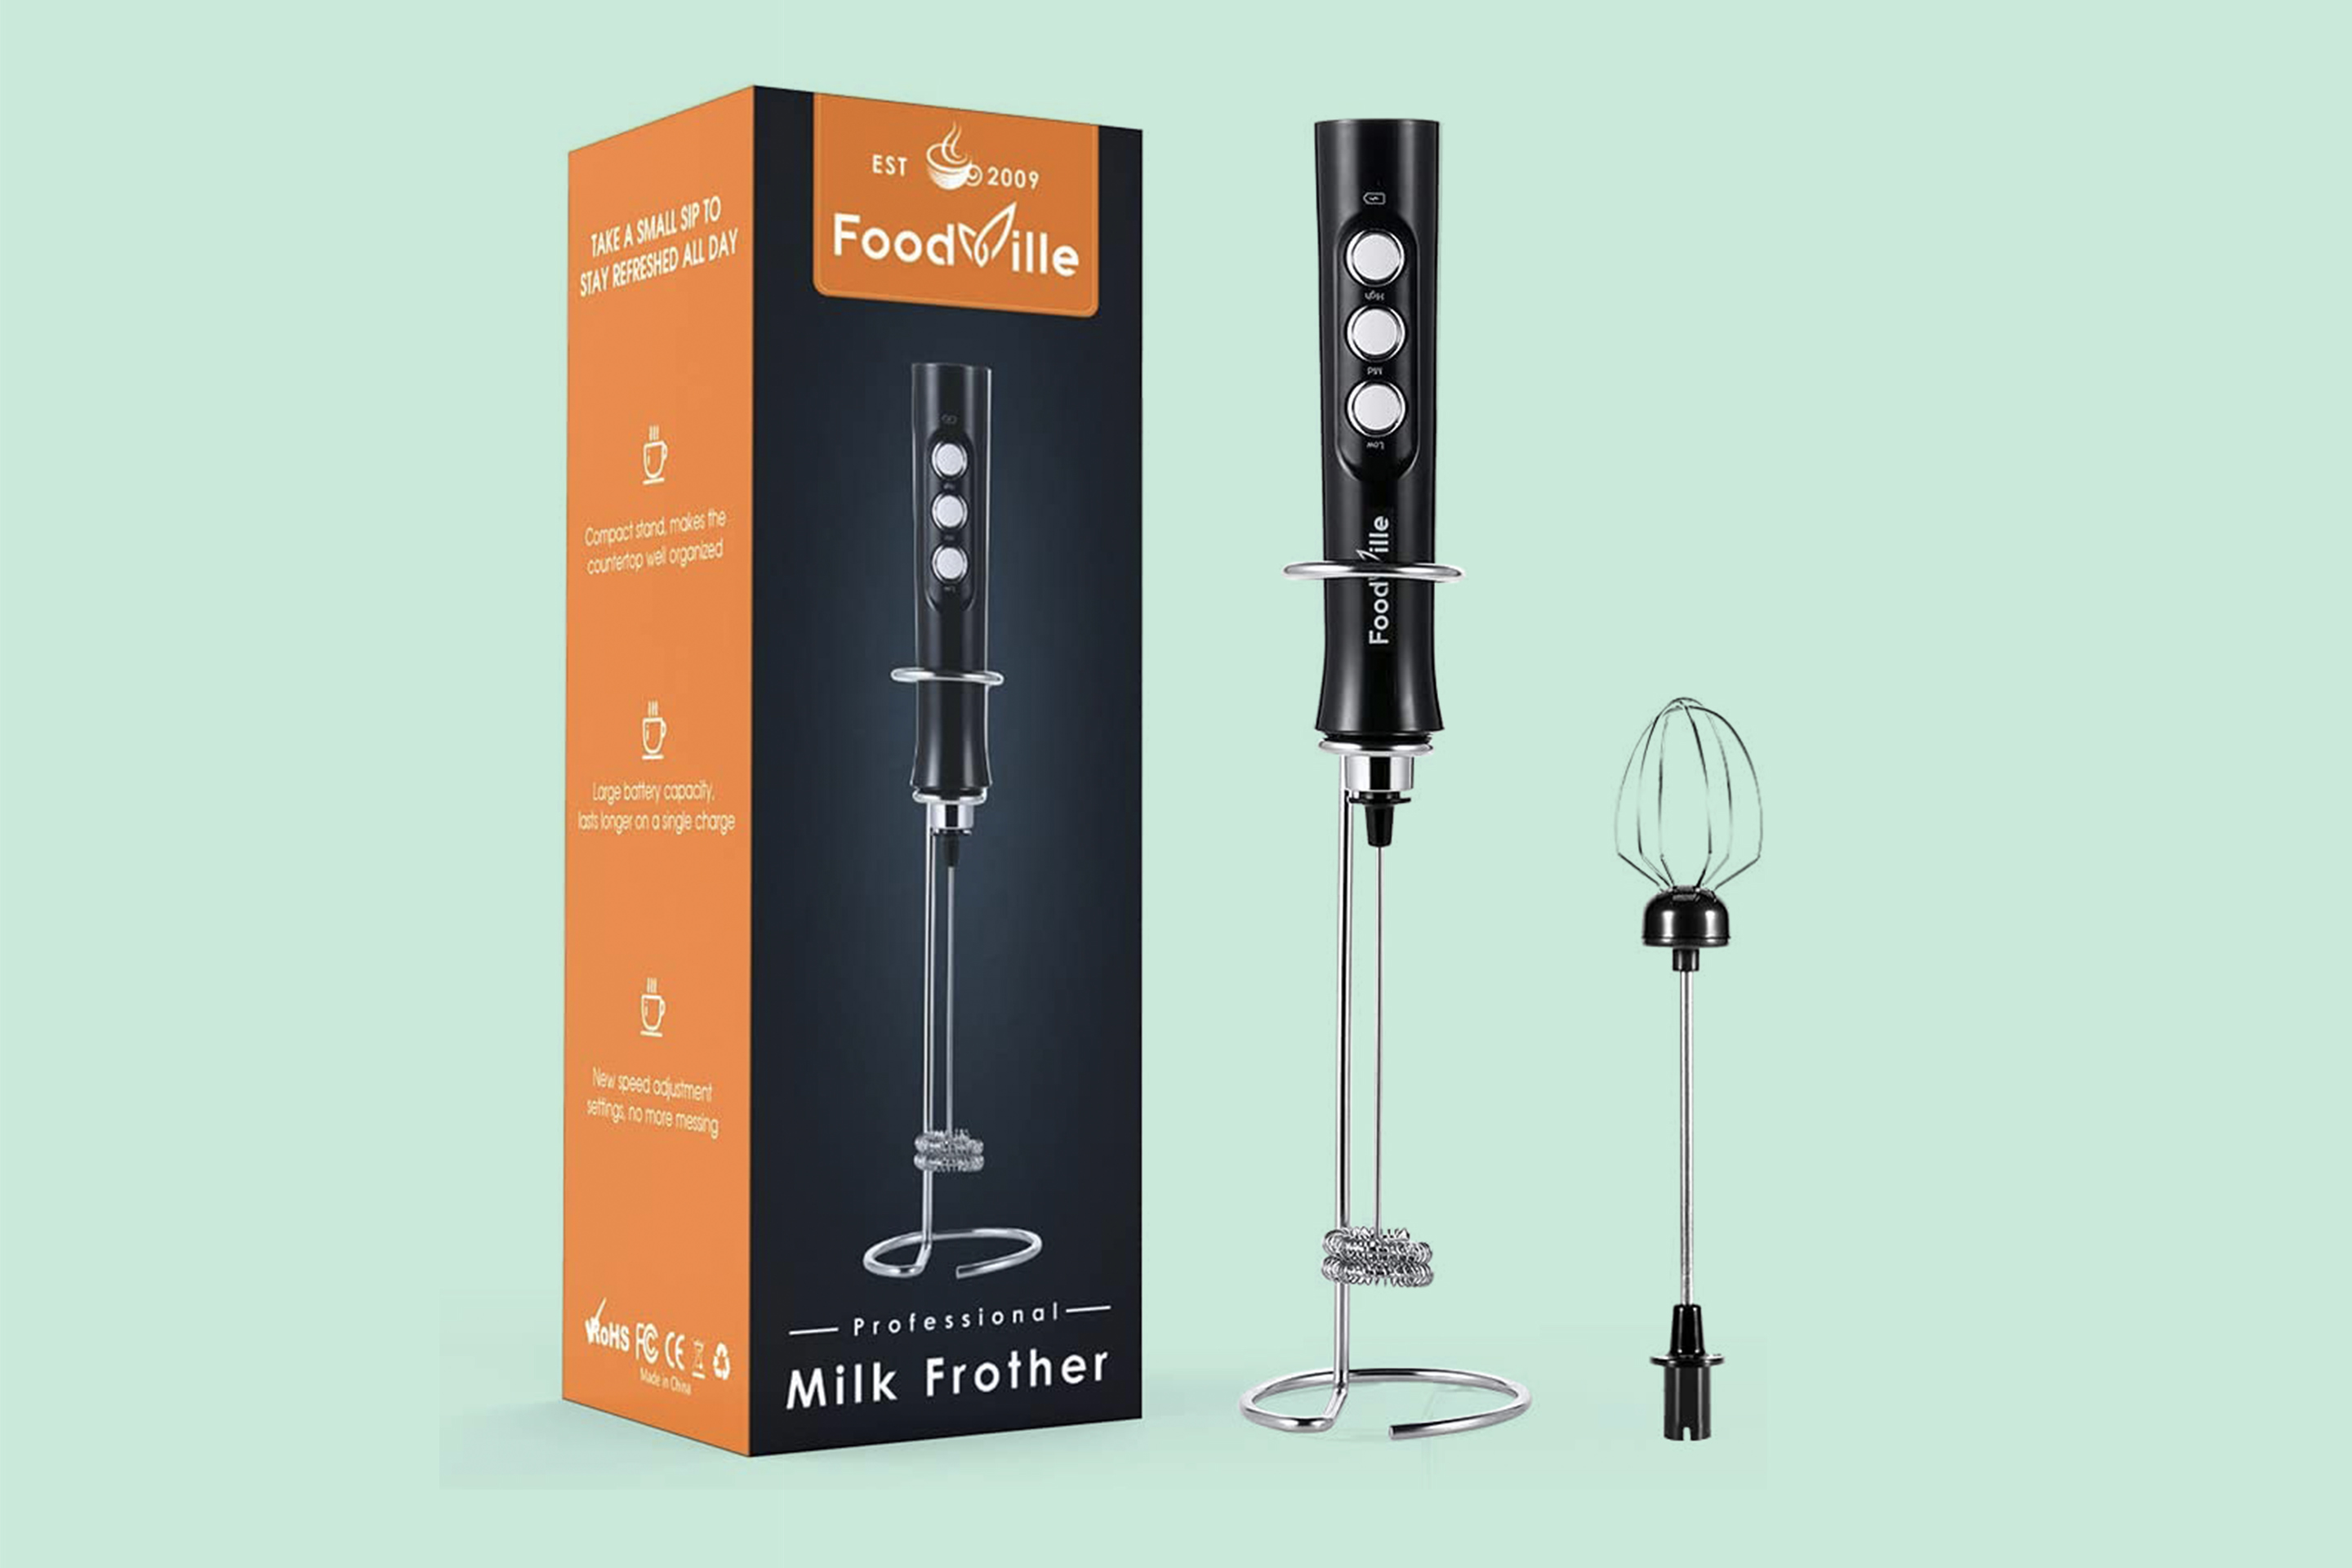 https://img.money.com/2021/03/Shopping-FoodVille-MF02-Rechargeable-Milk-Frother.jpg